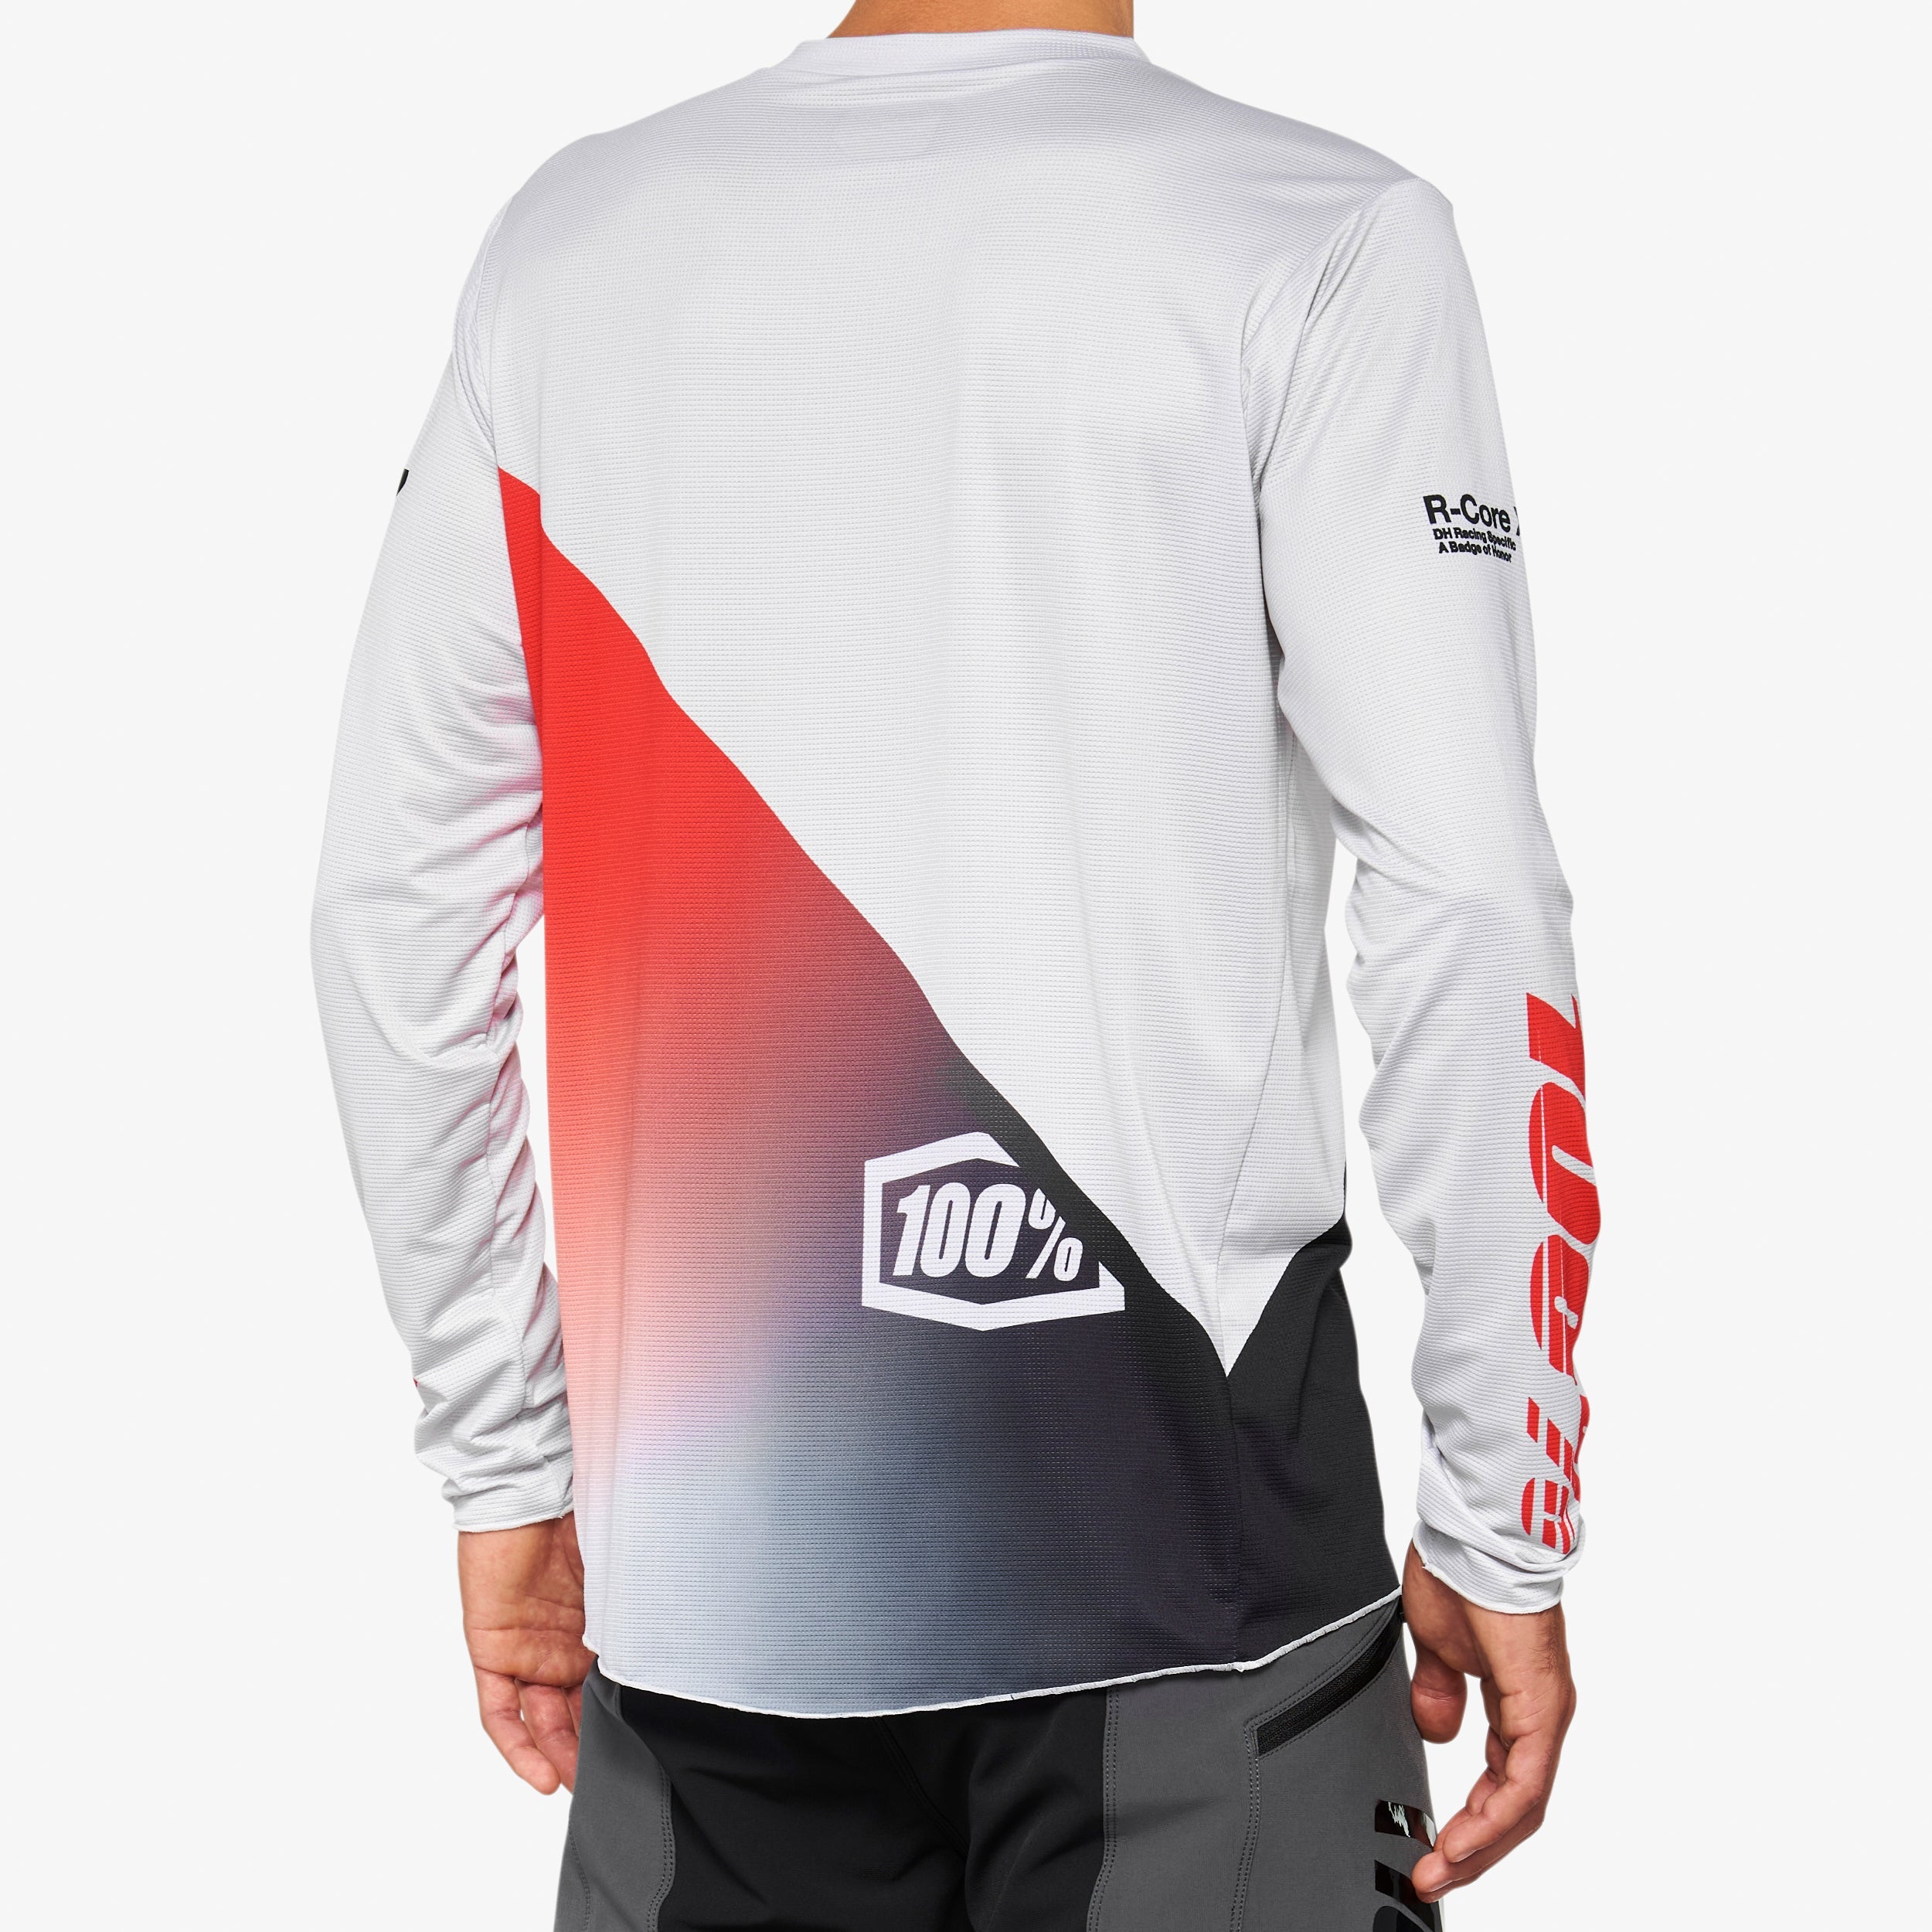 R-CORE-X Long Sleeve Jersey Grey/Racer Red - Secondary